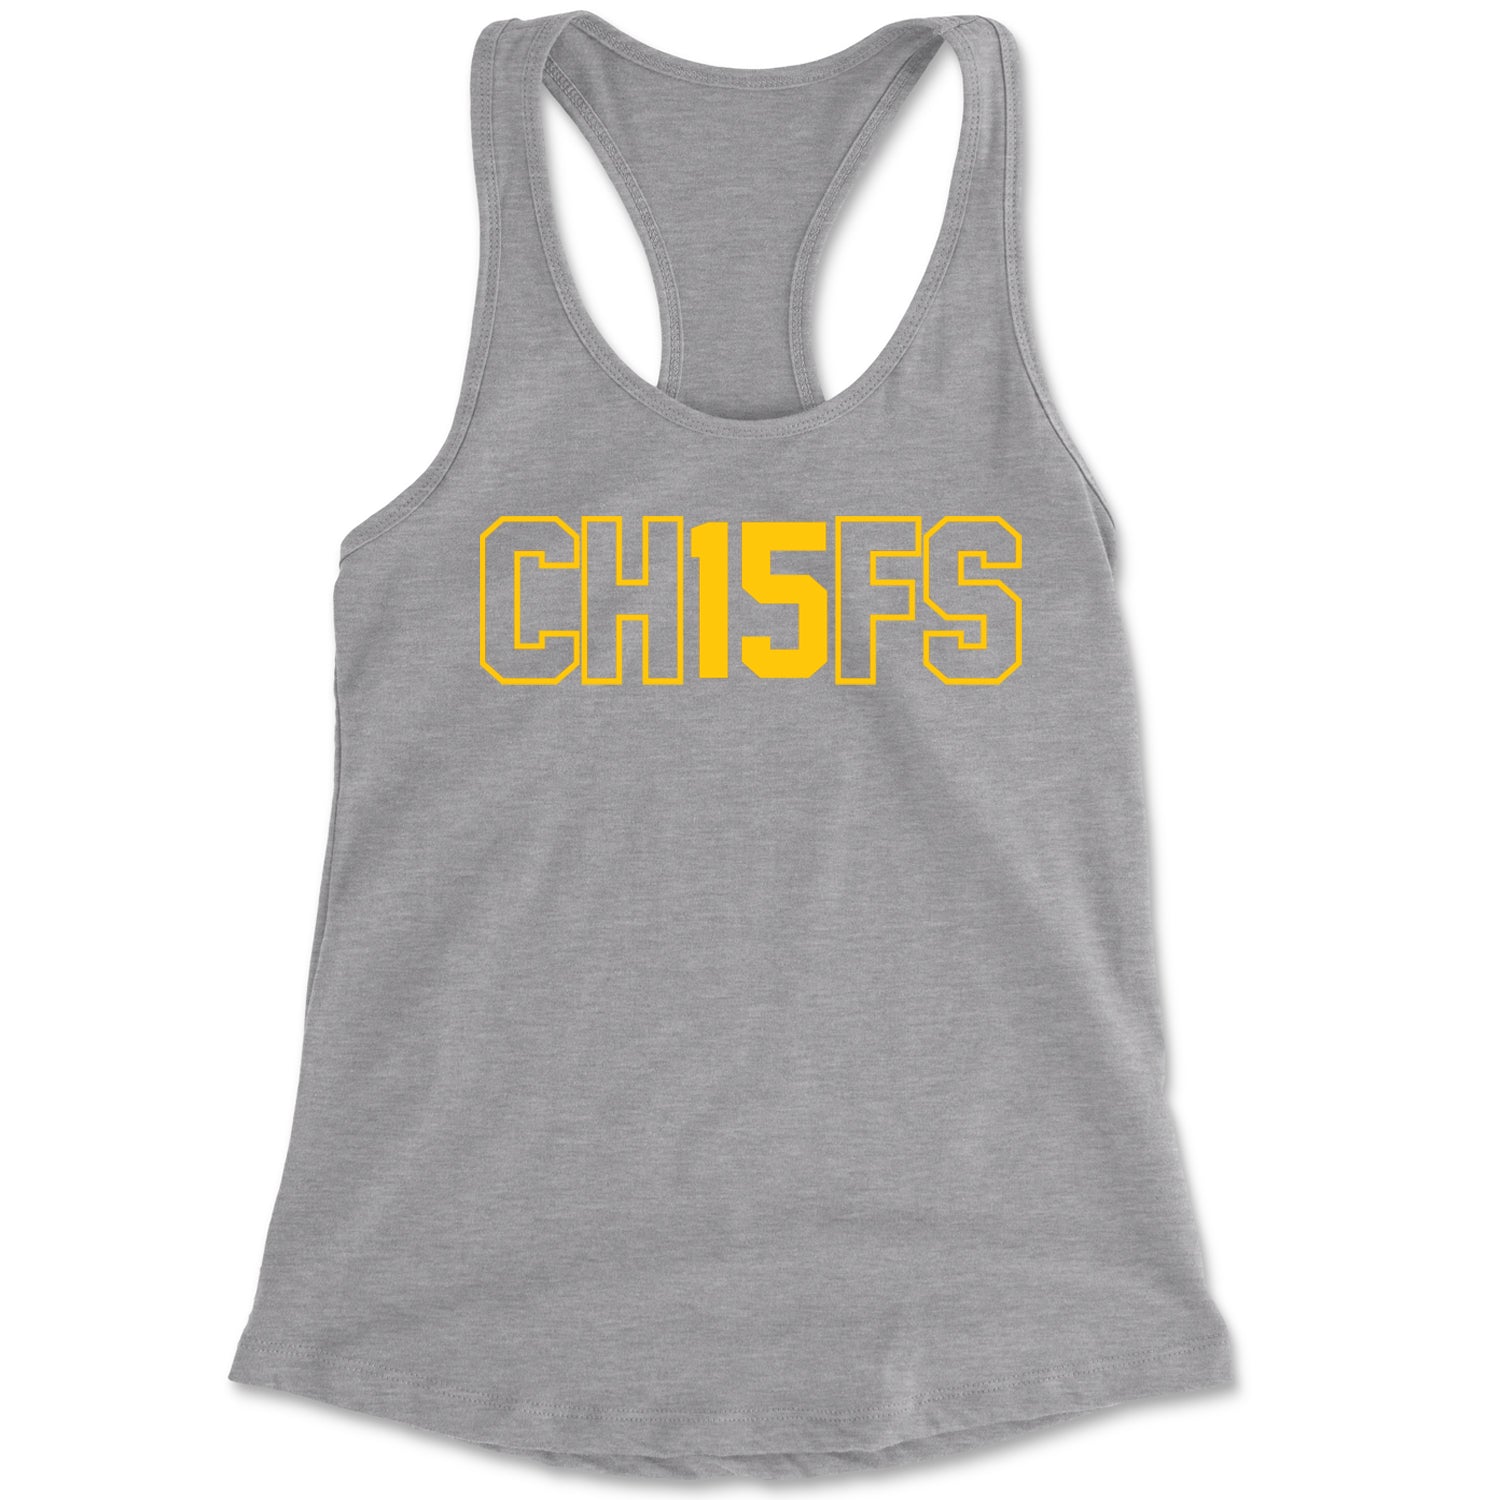 Ch15fs Chief 15 Shirt Racerback Tank Top for Women ass, big, burrowhead, game, kelce, know, moutha, my, nd, patrick, role, shut, sports, your by Expression Tees